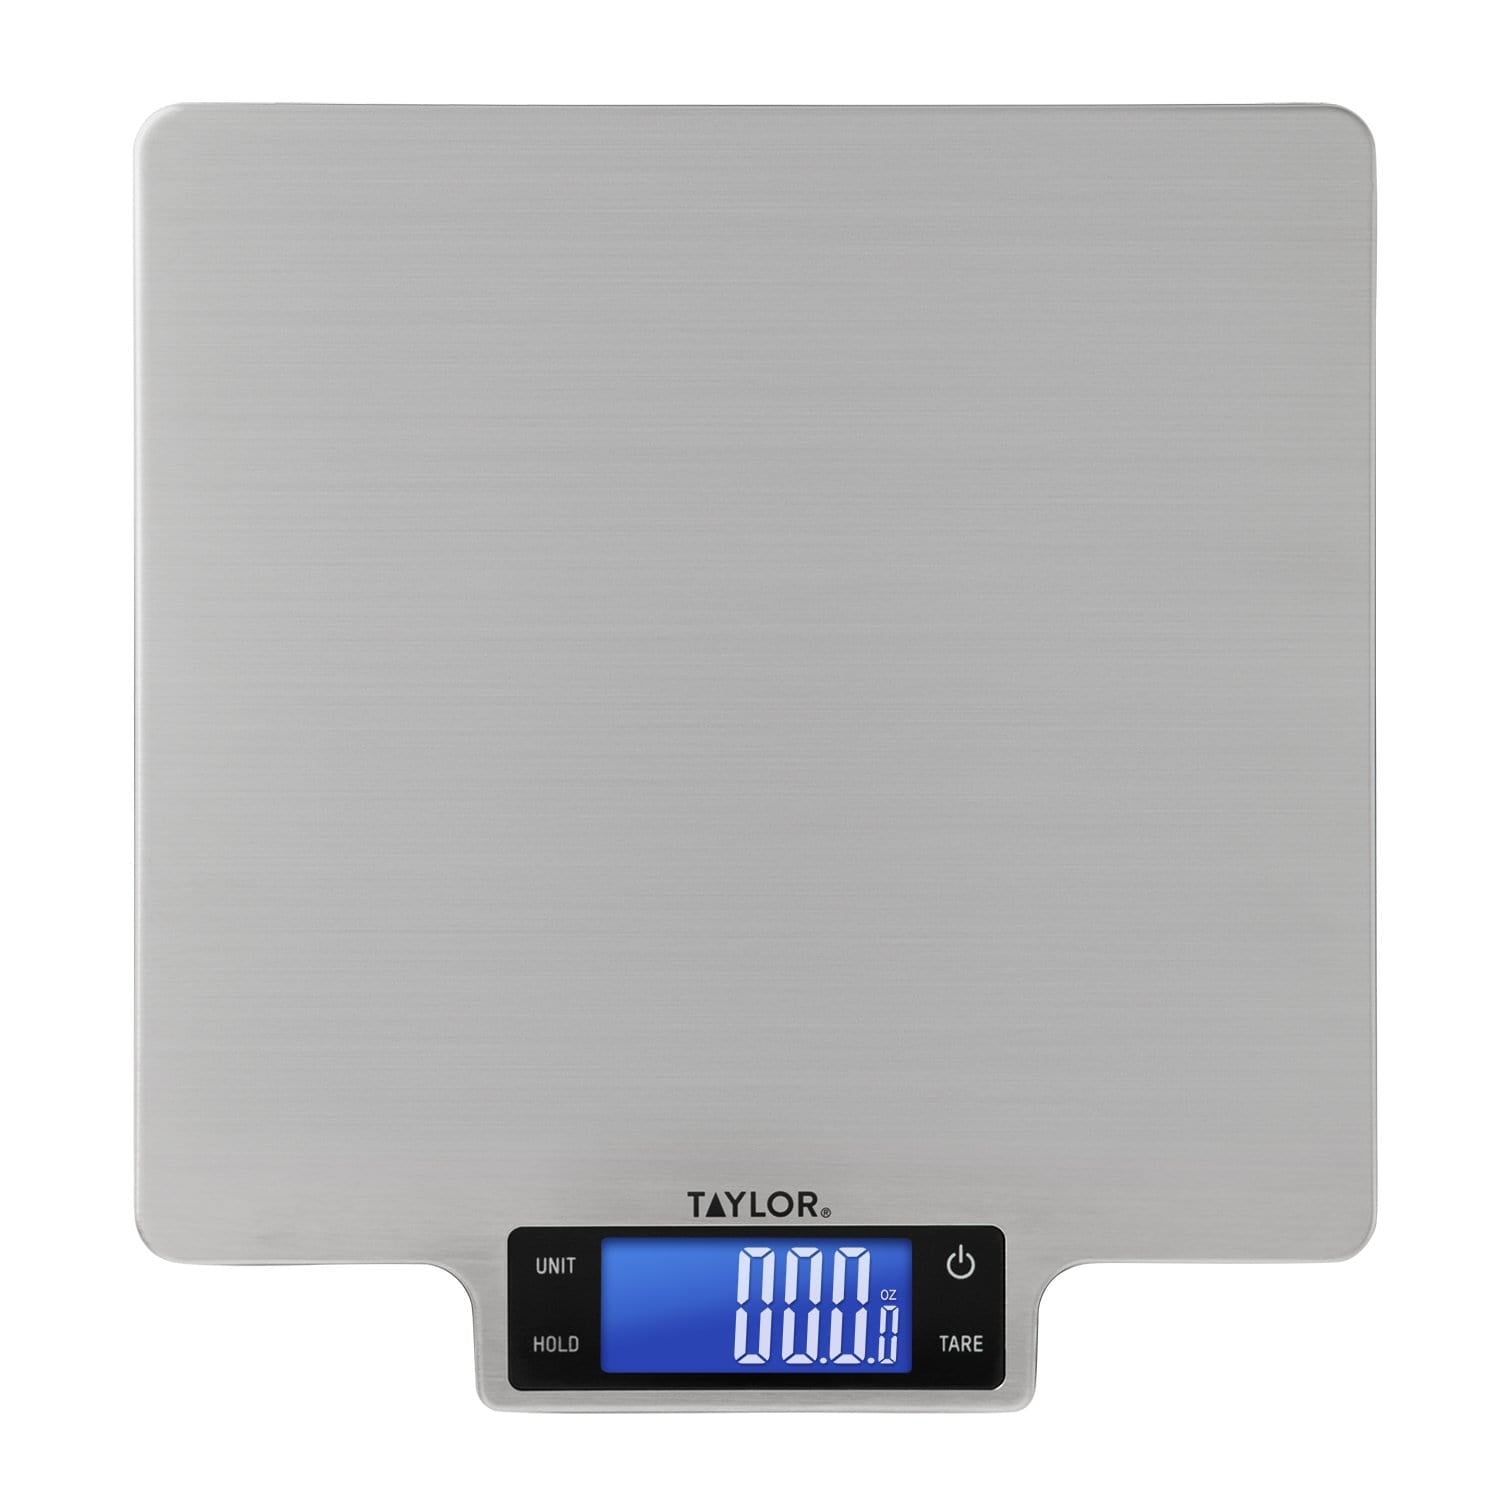 High Capacity Kitchen Scale - a Premium Food Scale That Weighs in